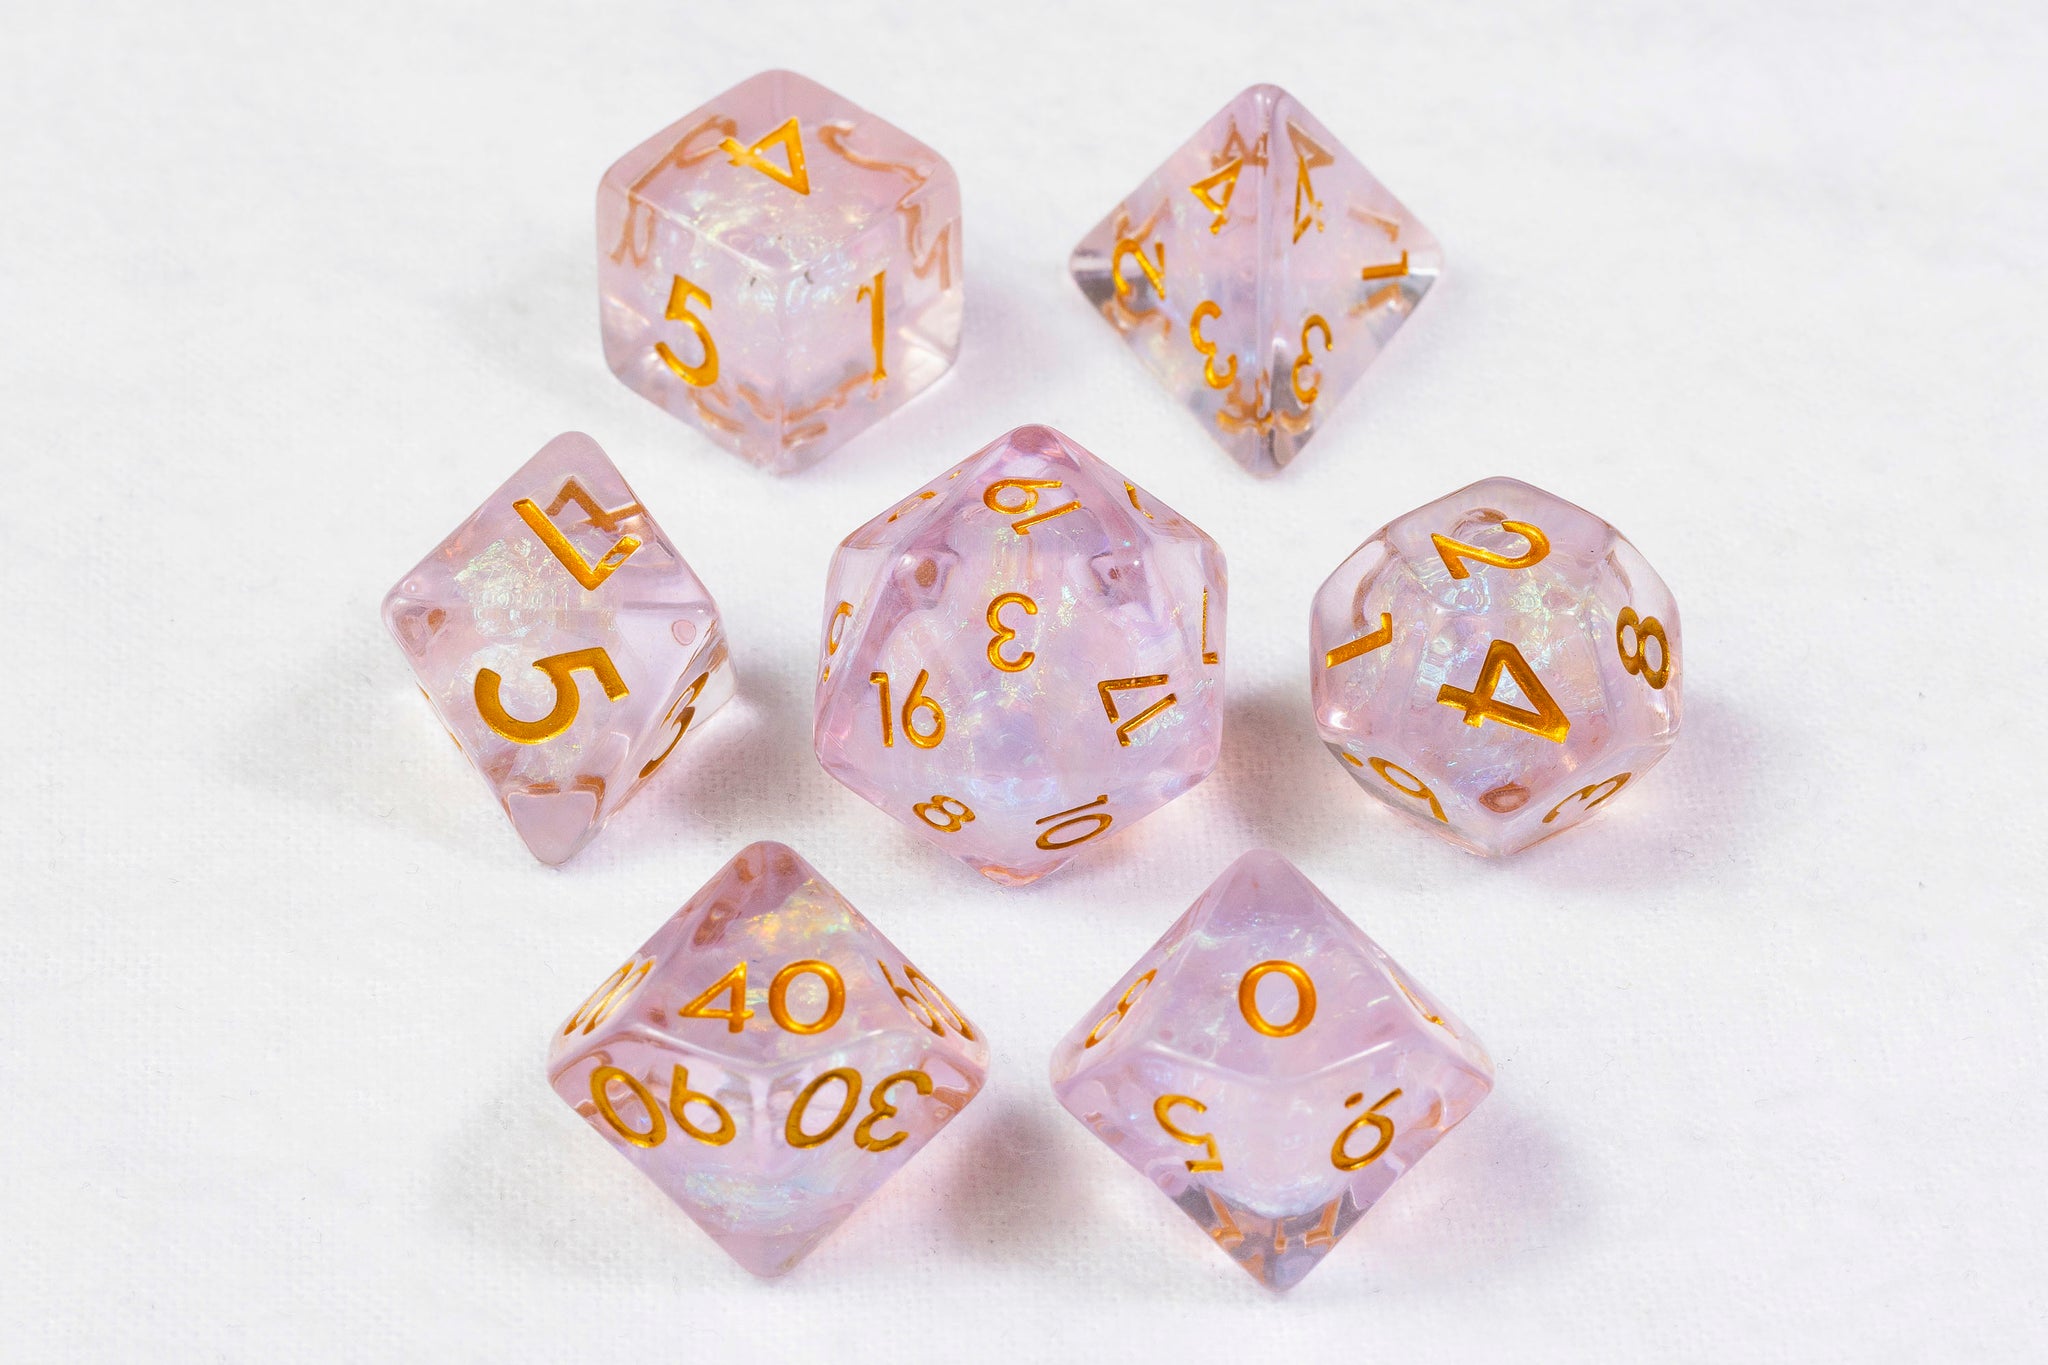 Glimmer of Hope Polyhedral Dice Set